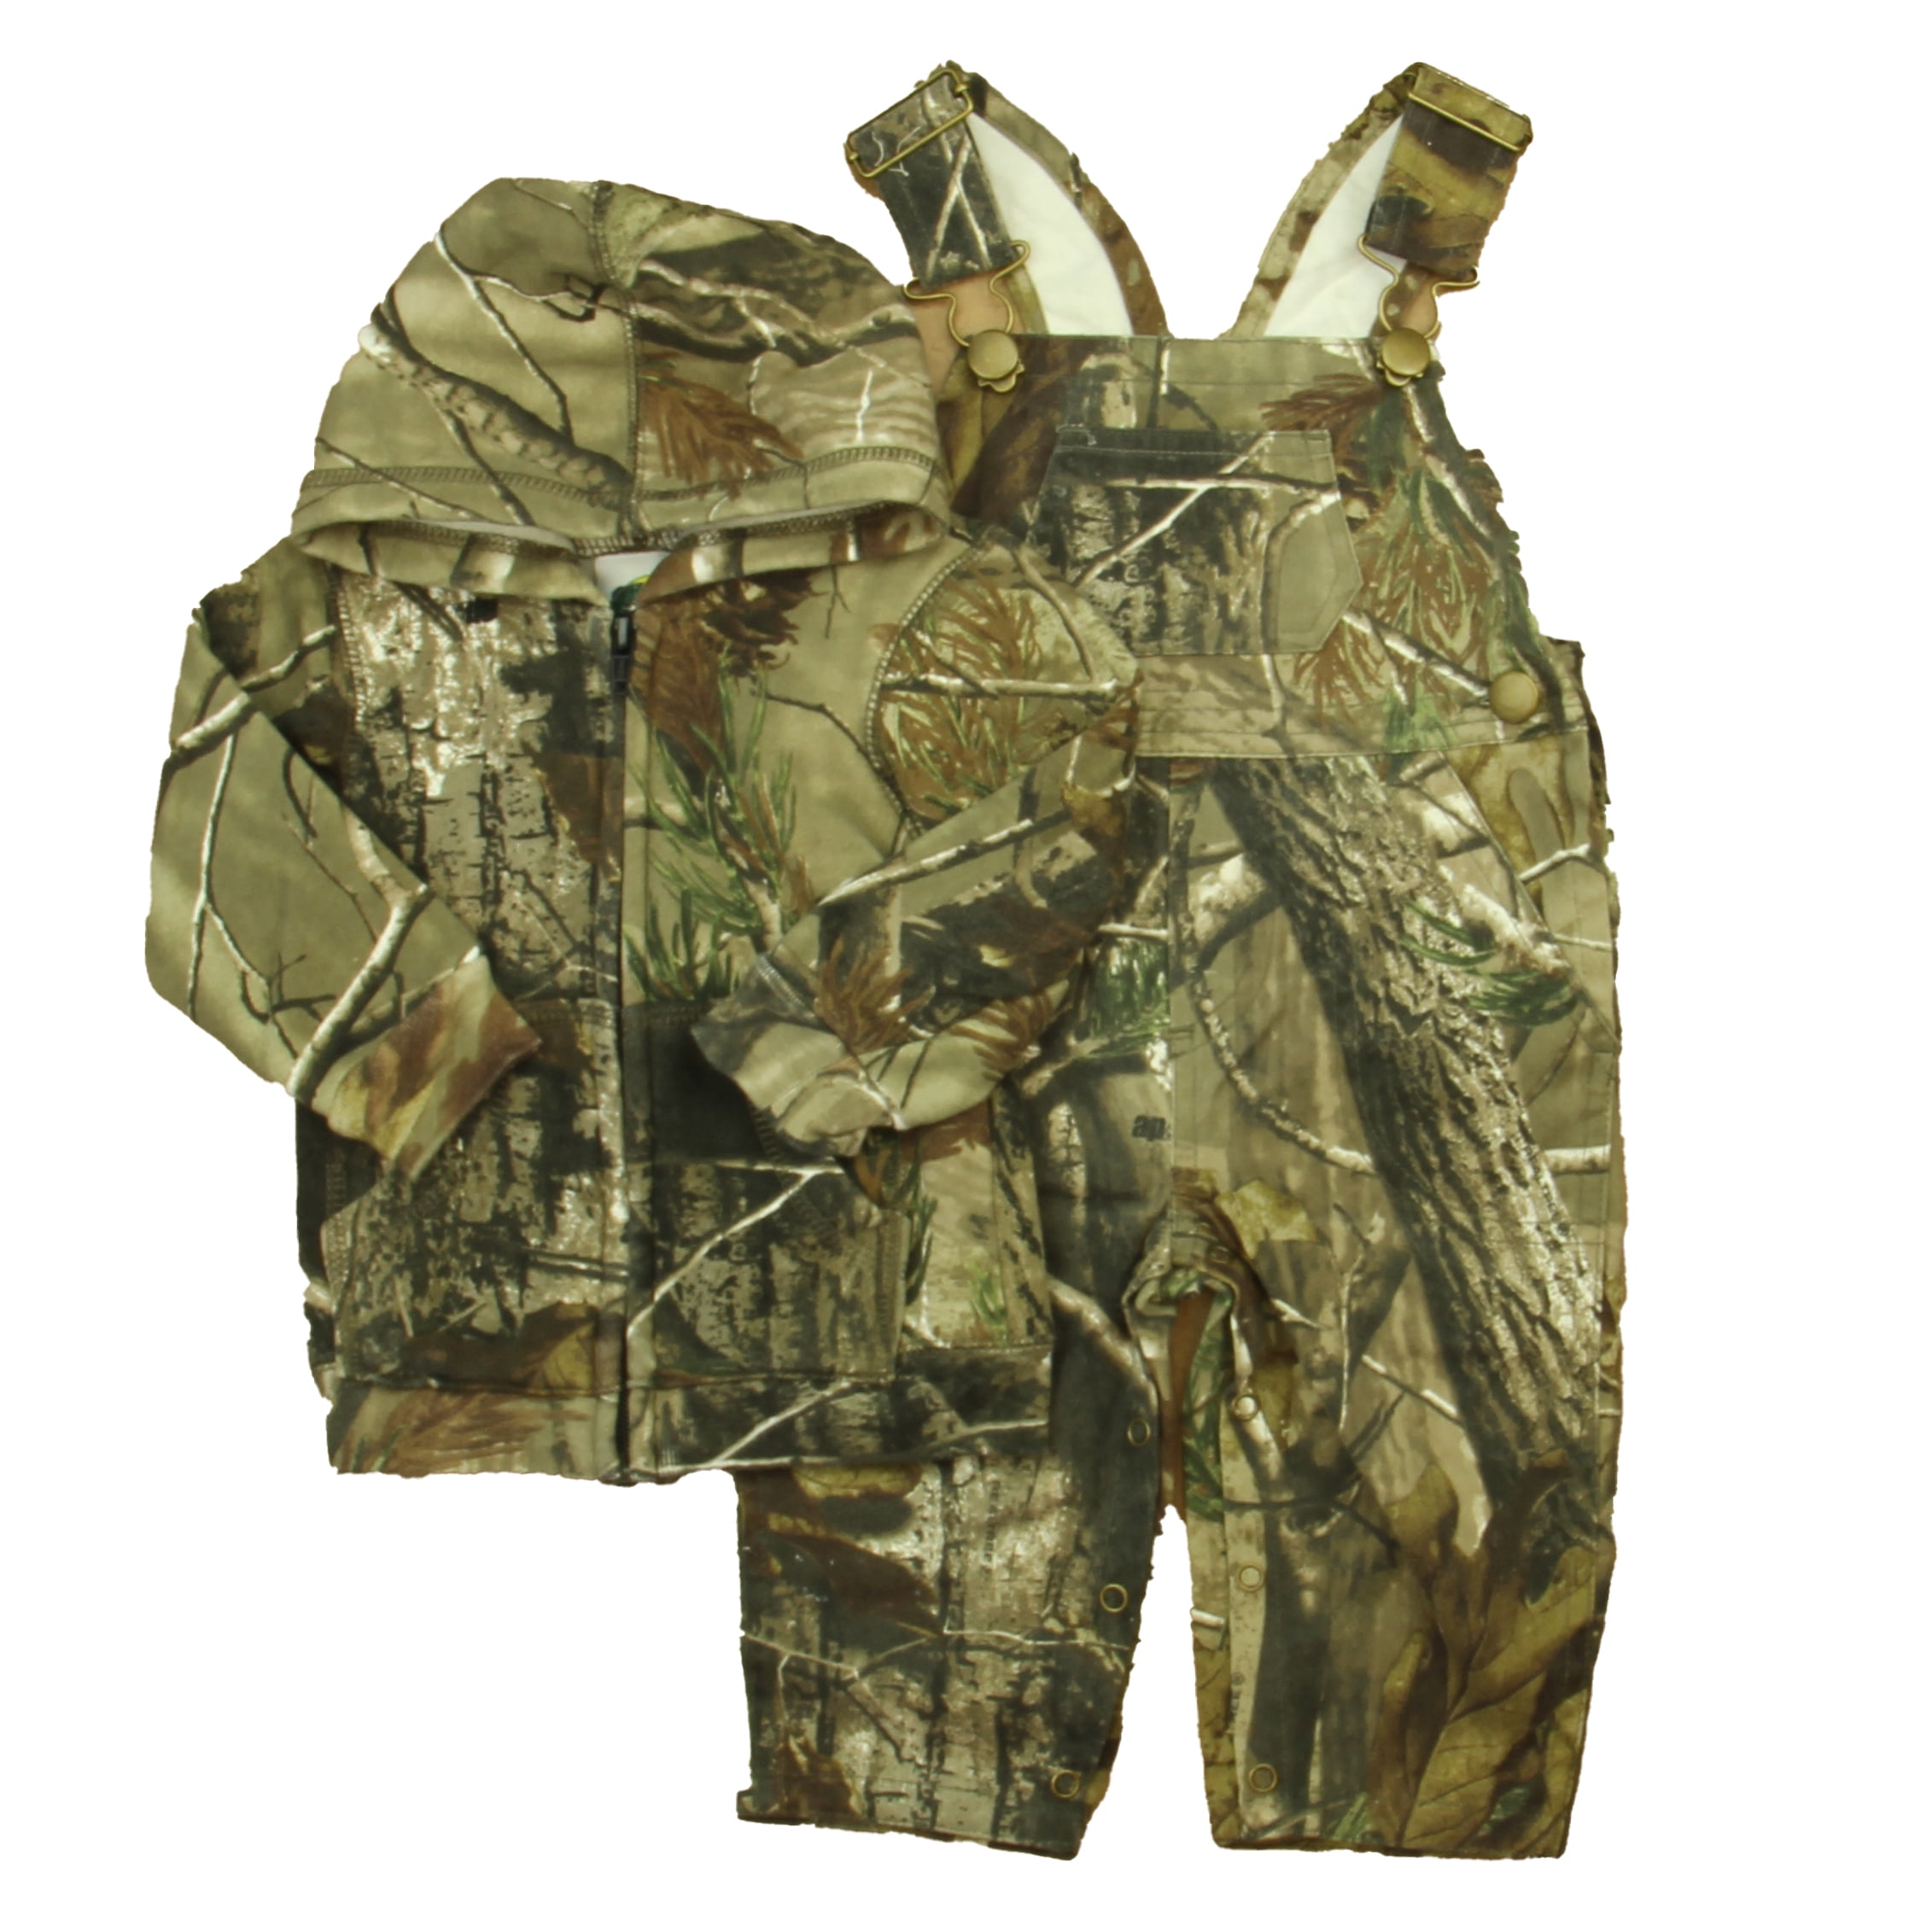 Pre-owned Bass Pro Shops Boys Green Camo Apparel Sets size: 9 Months 